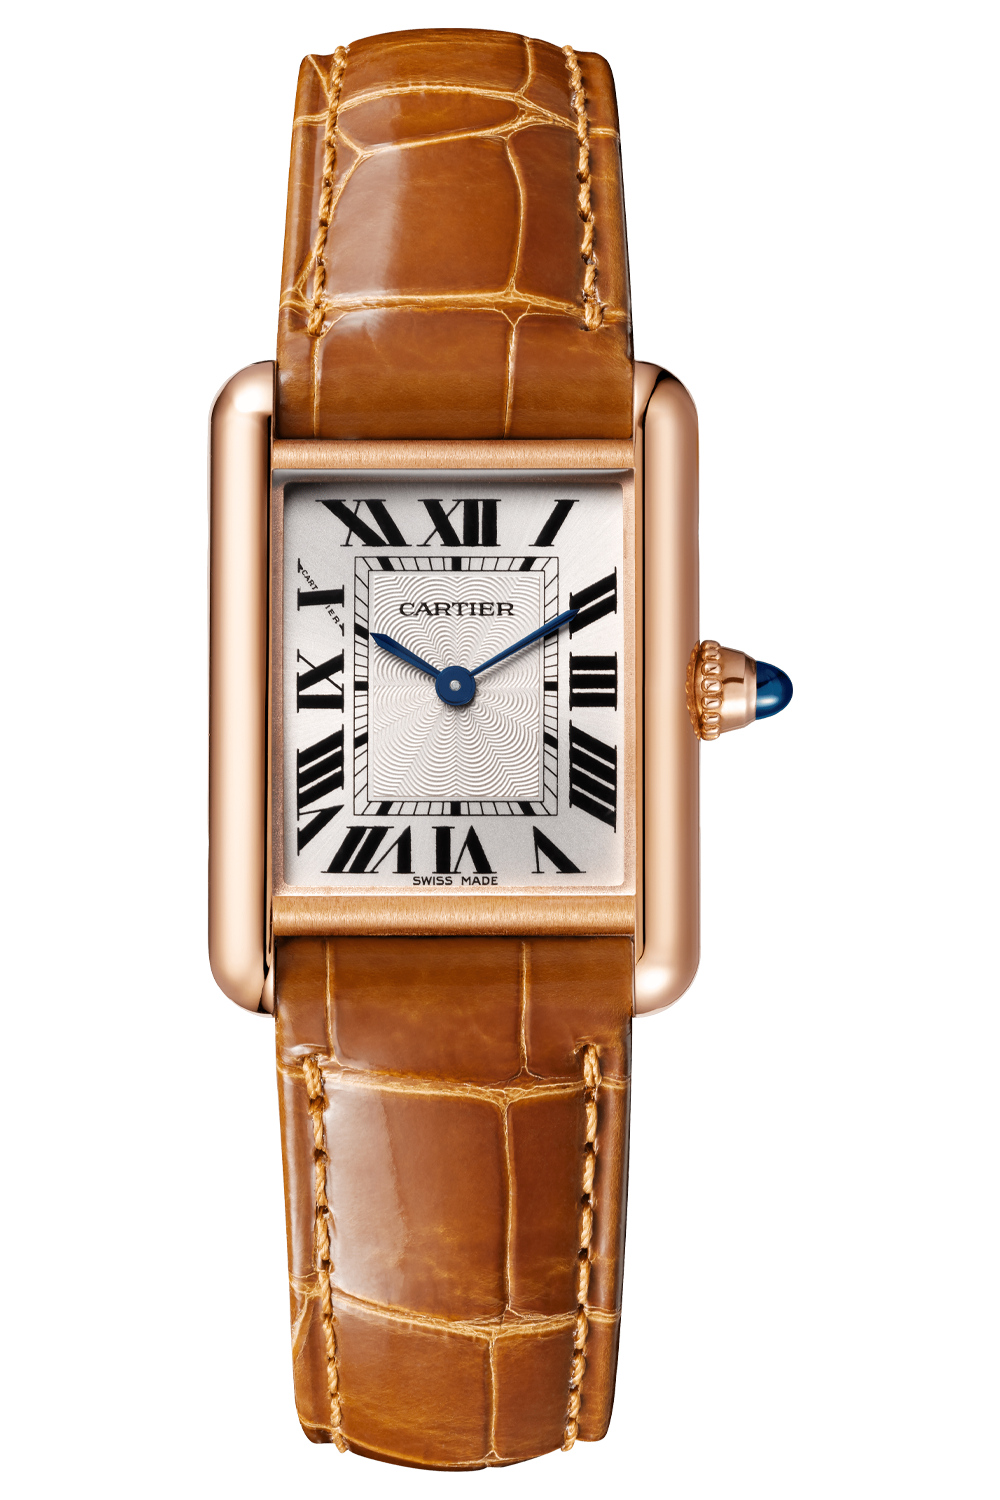 Cartier Men's Ronde Solo Louis Rose Gold Manual Watch (W6800251) | Rose/Red/Pink Gold | 36 mm Diameter | Certified Pre-owned | Tourneau